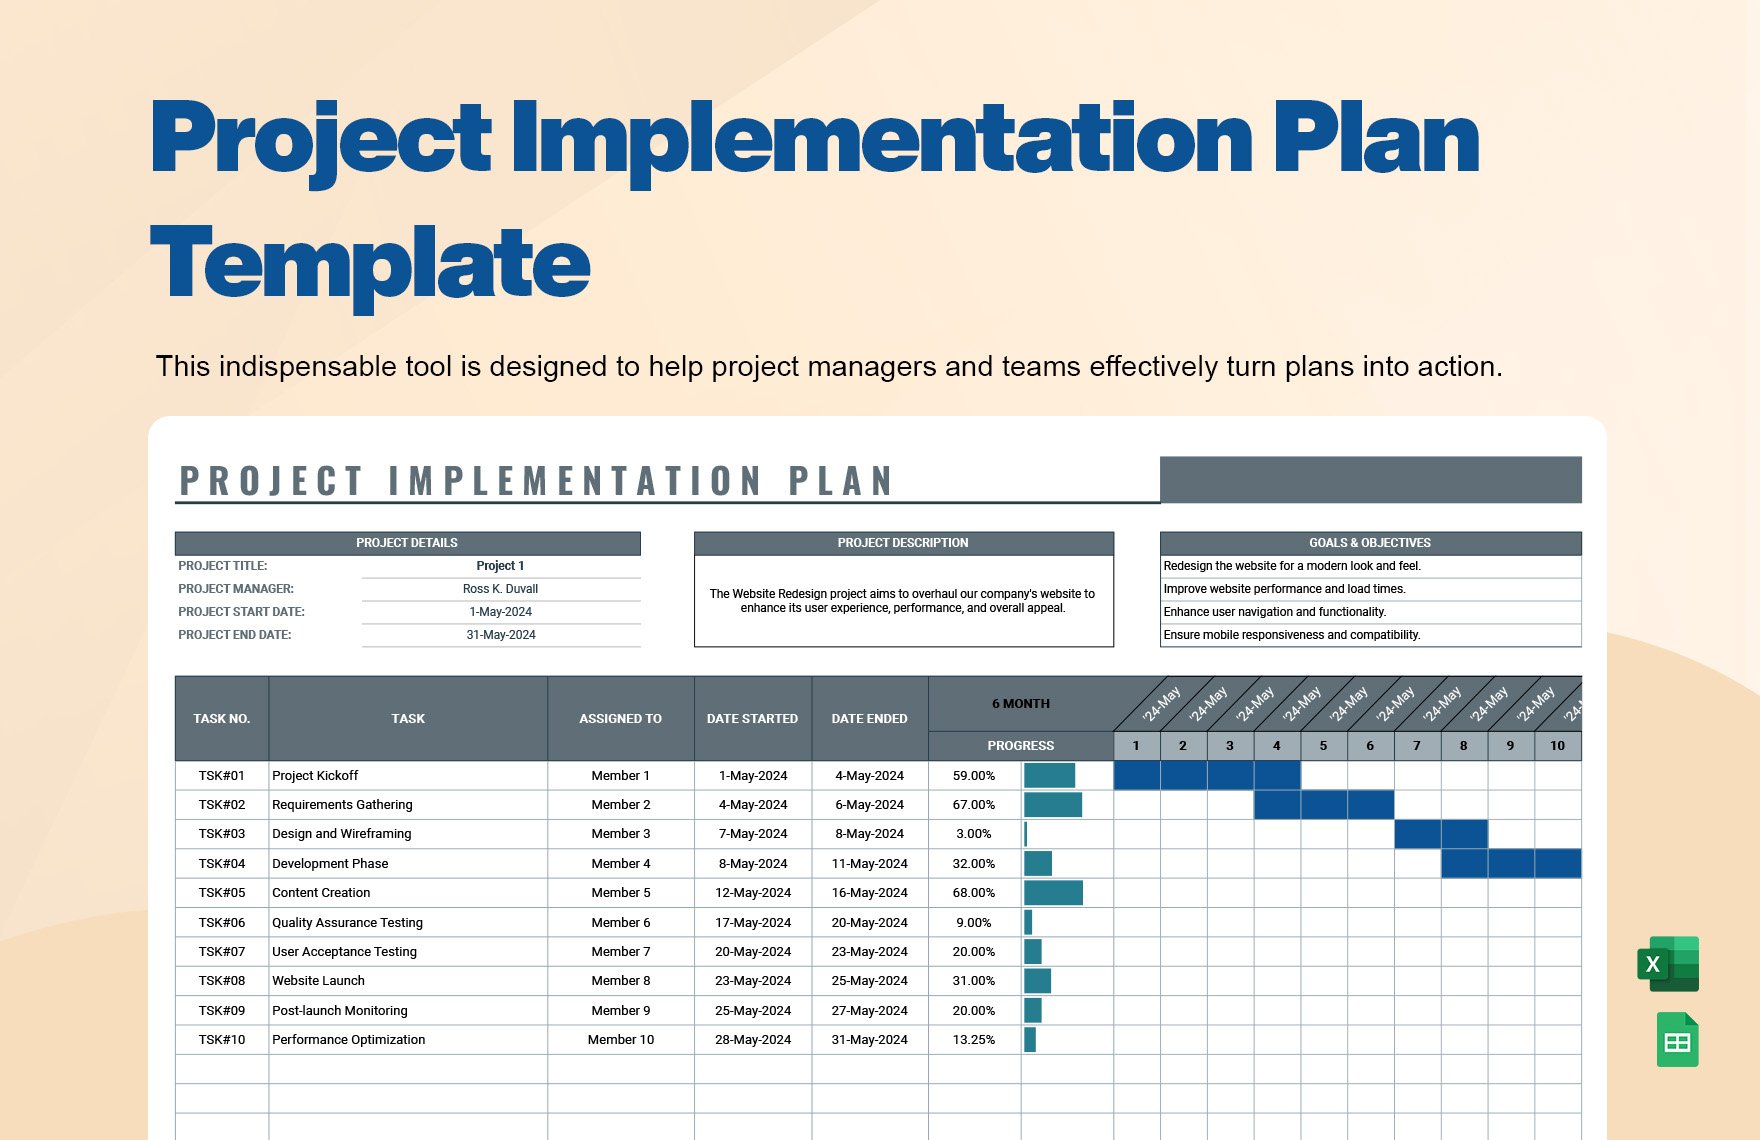 Free Project Implementation Plan Template